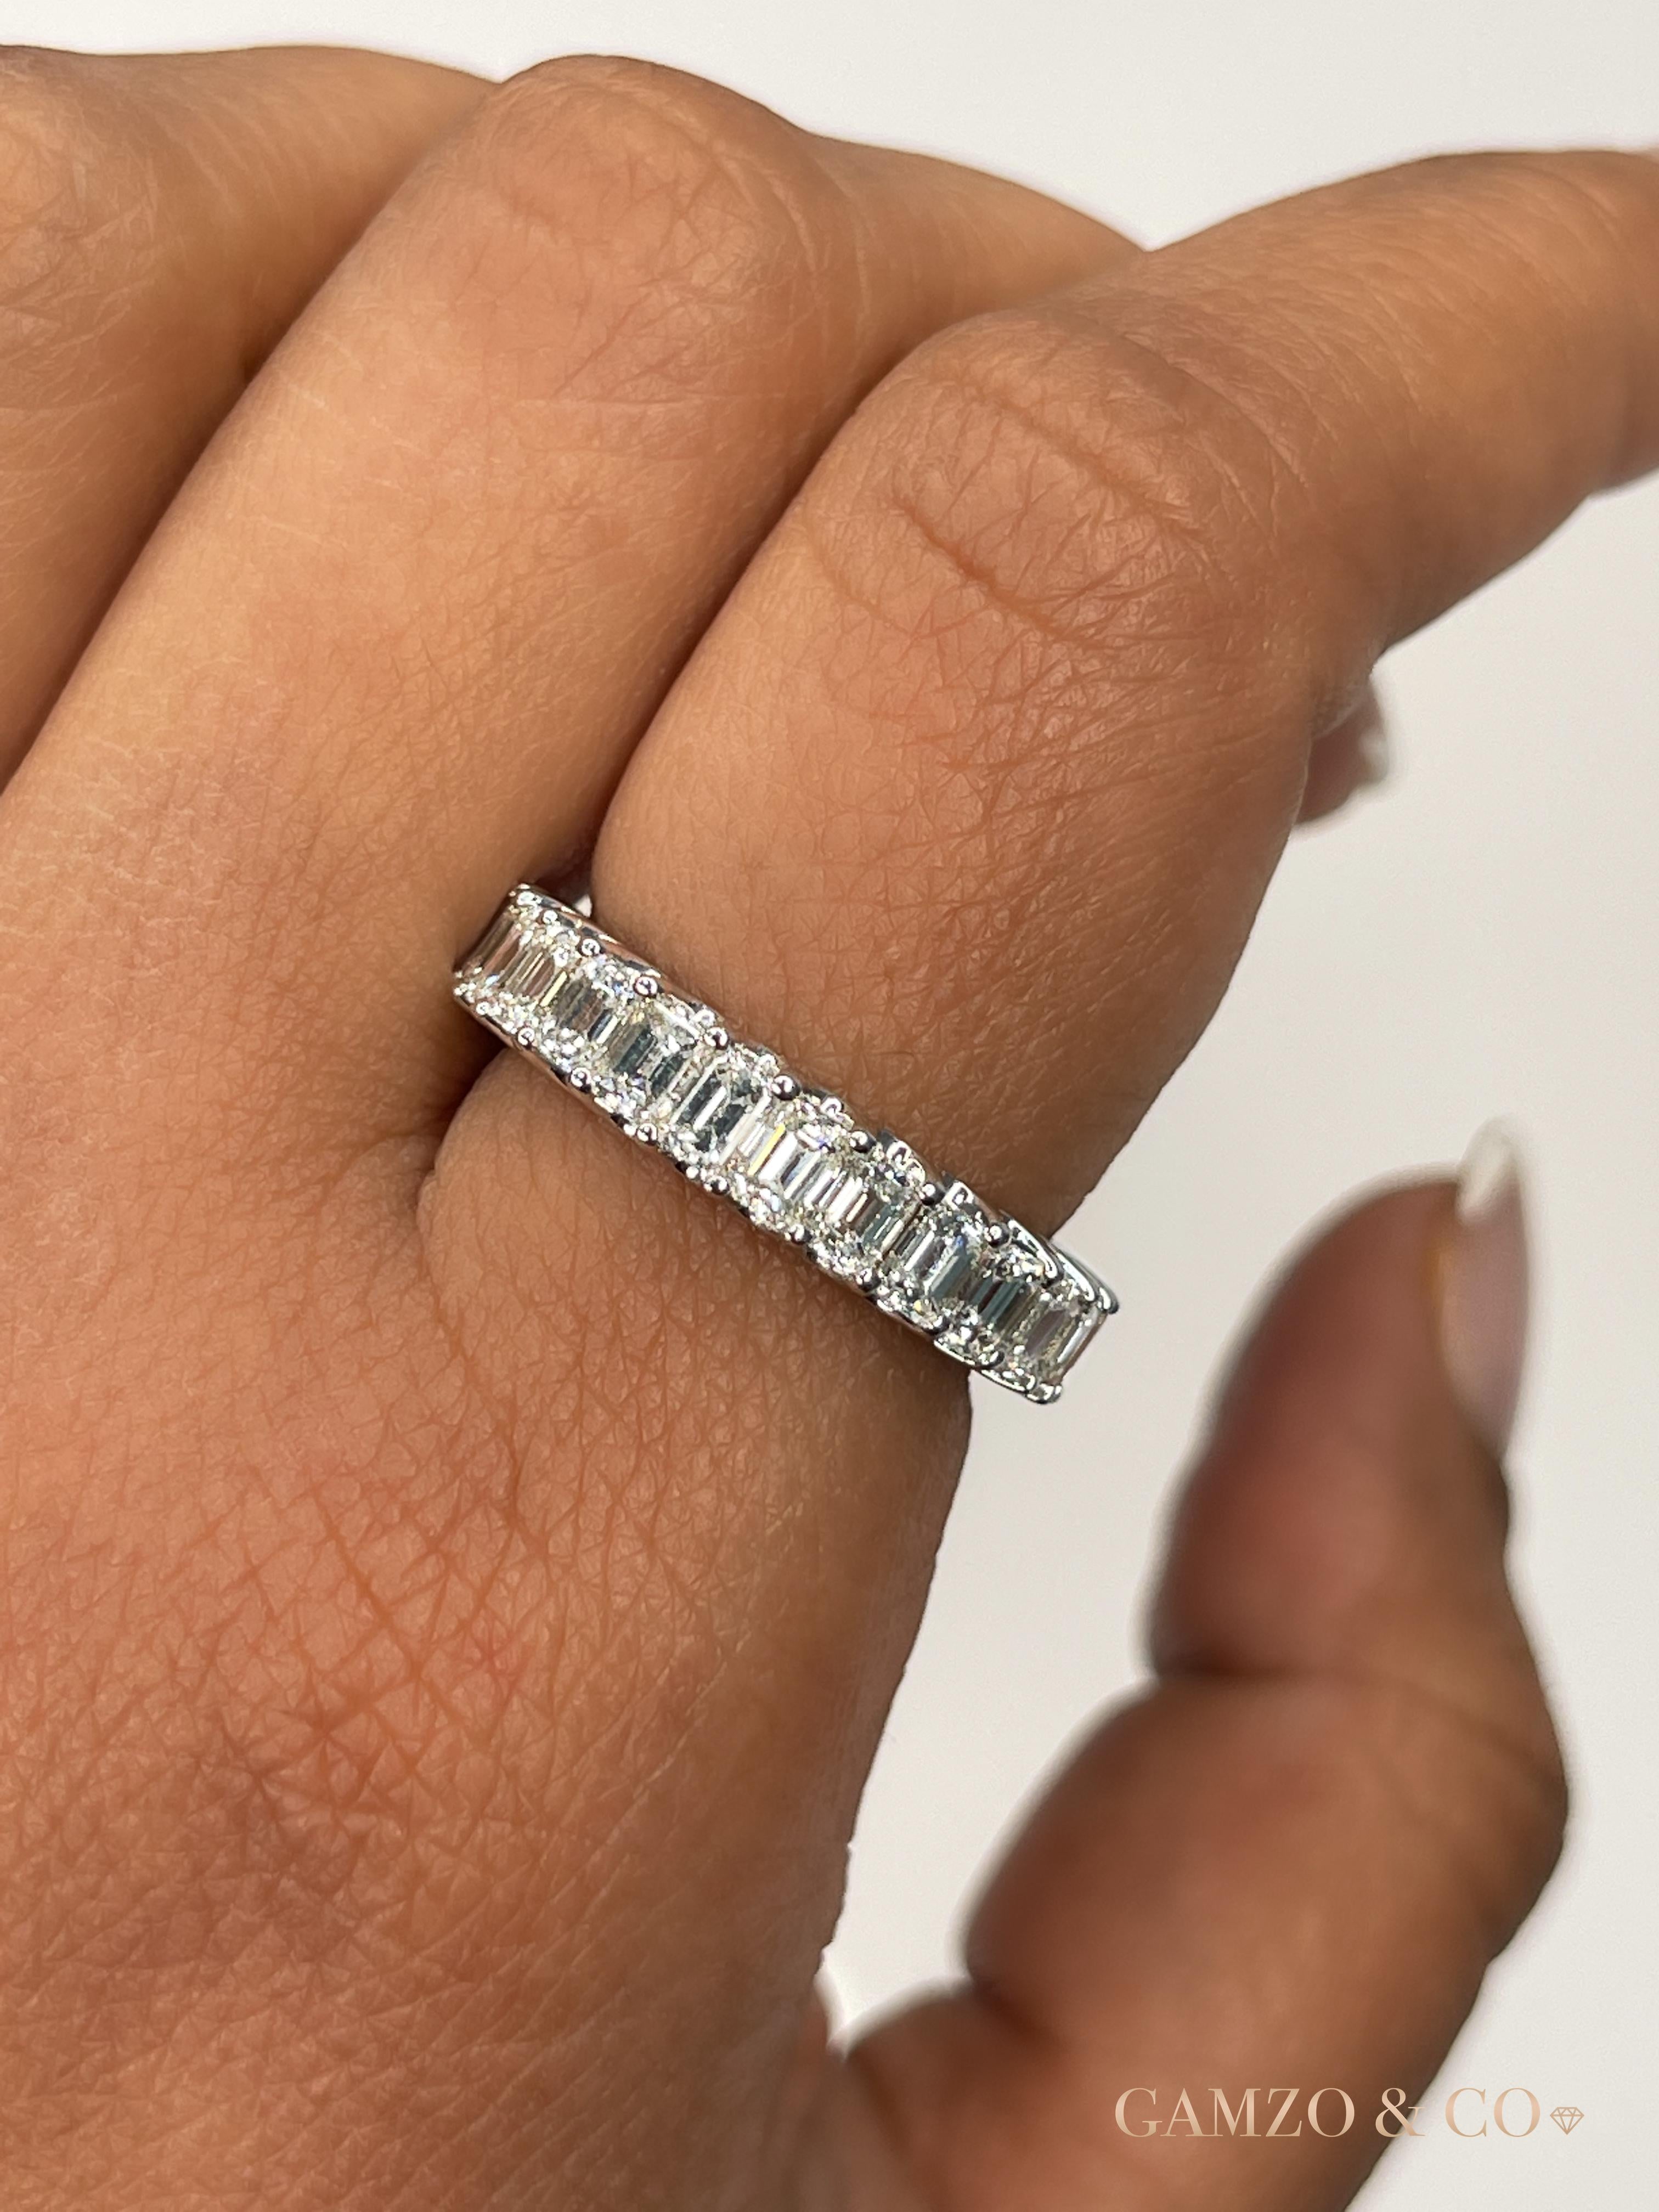 For Sale:  18k White Gold 4 Carat Natural Emerald Cut Diamond Eternity Ring 3